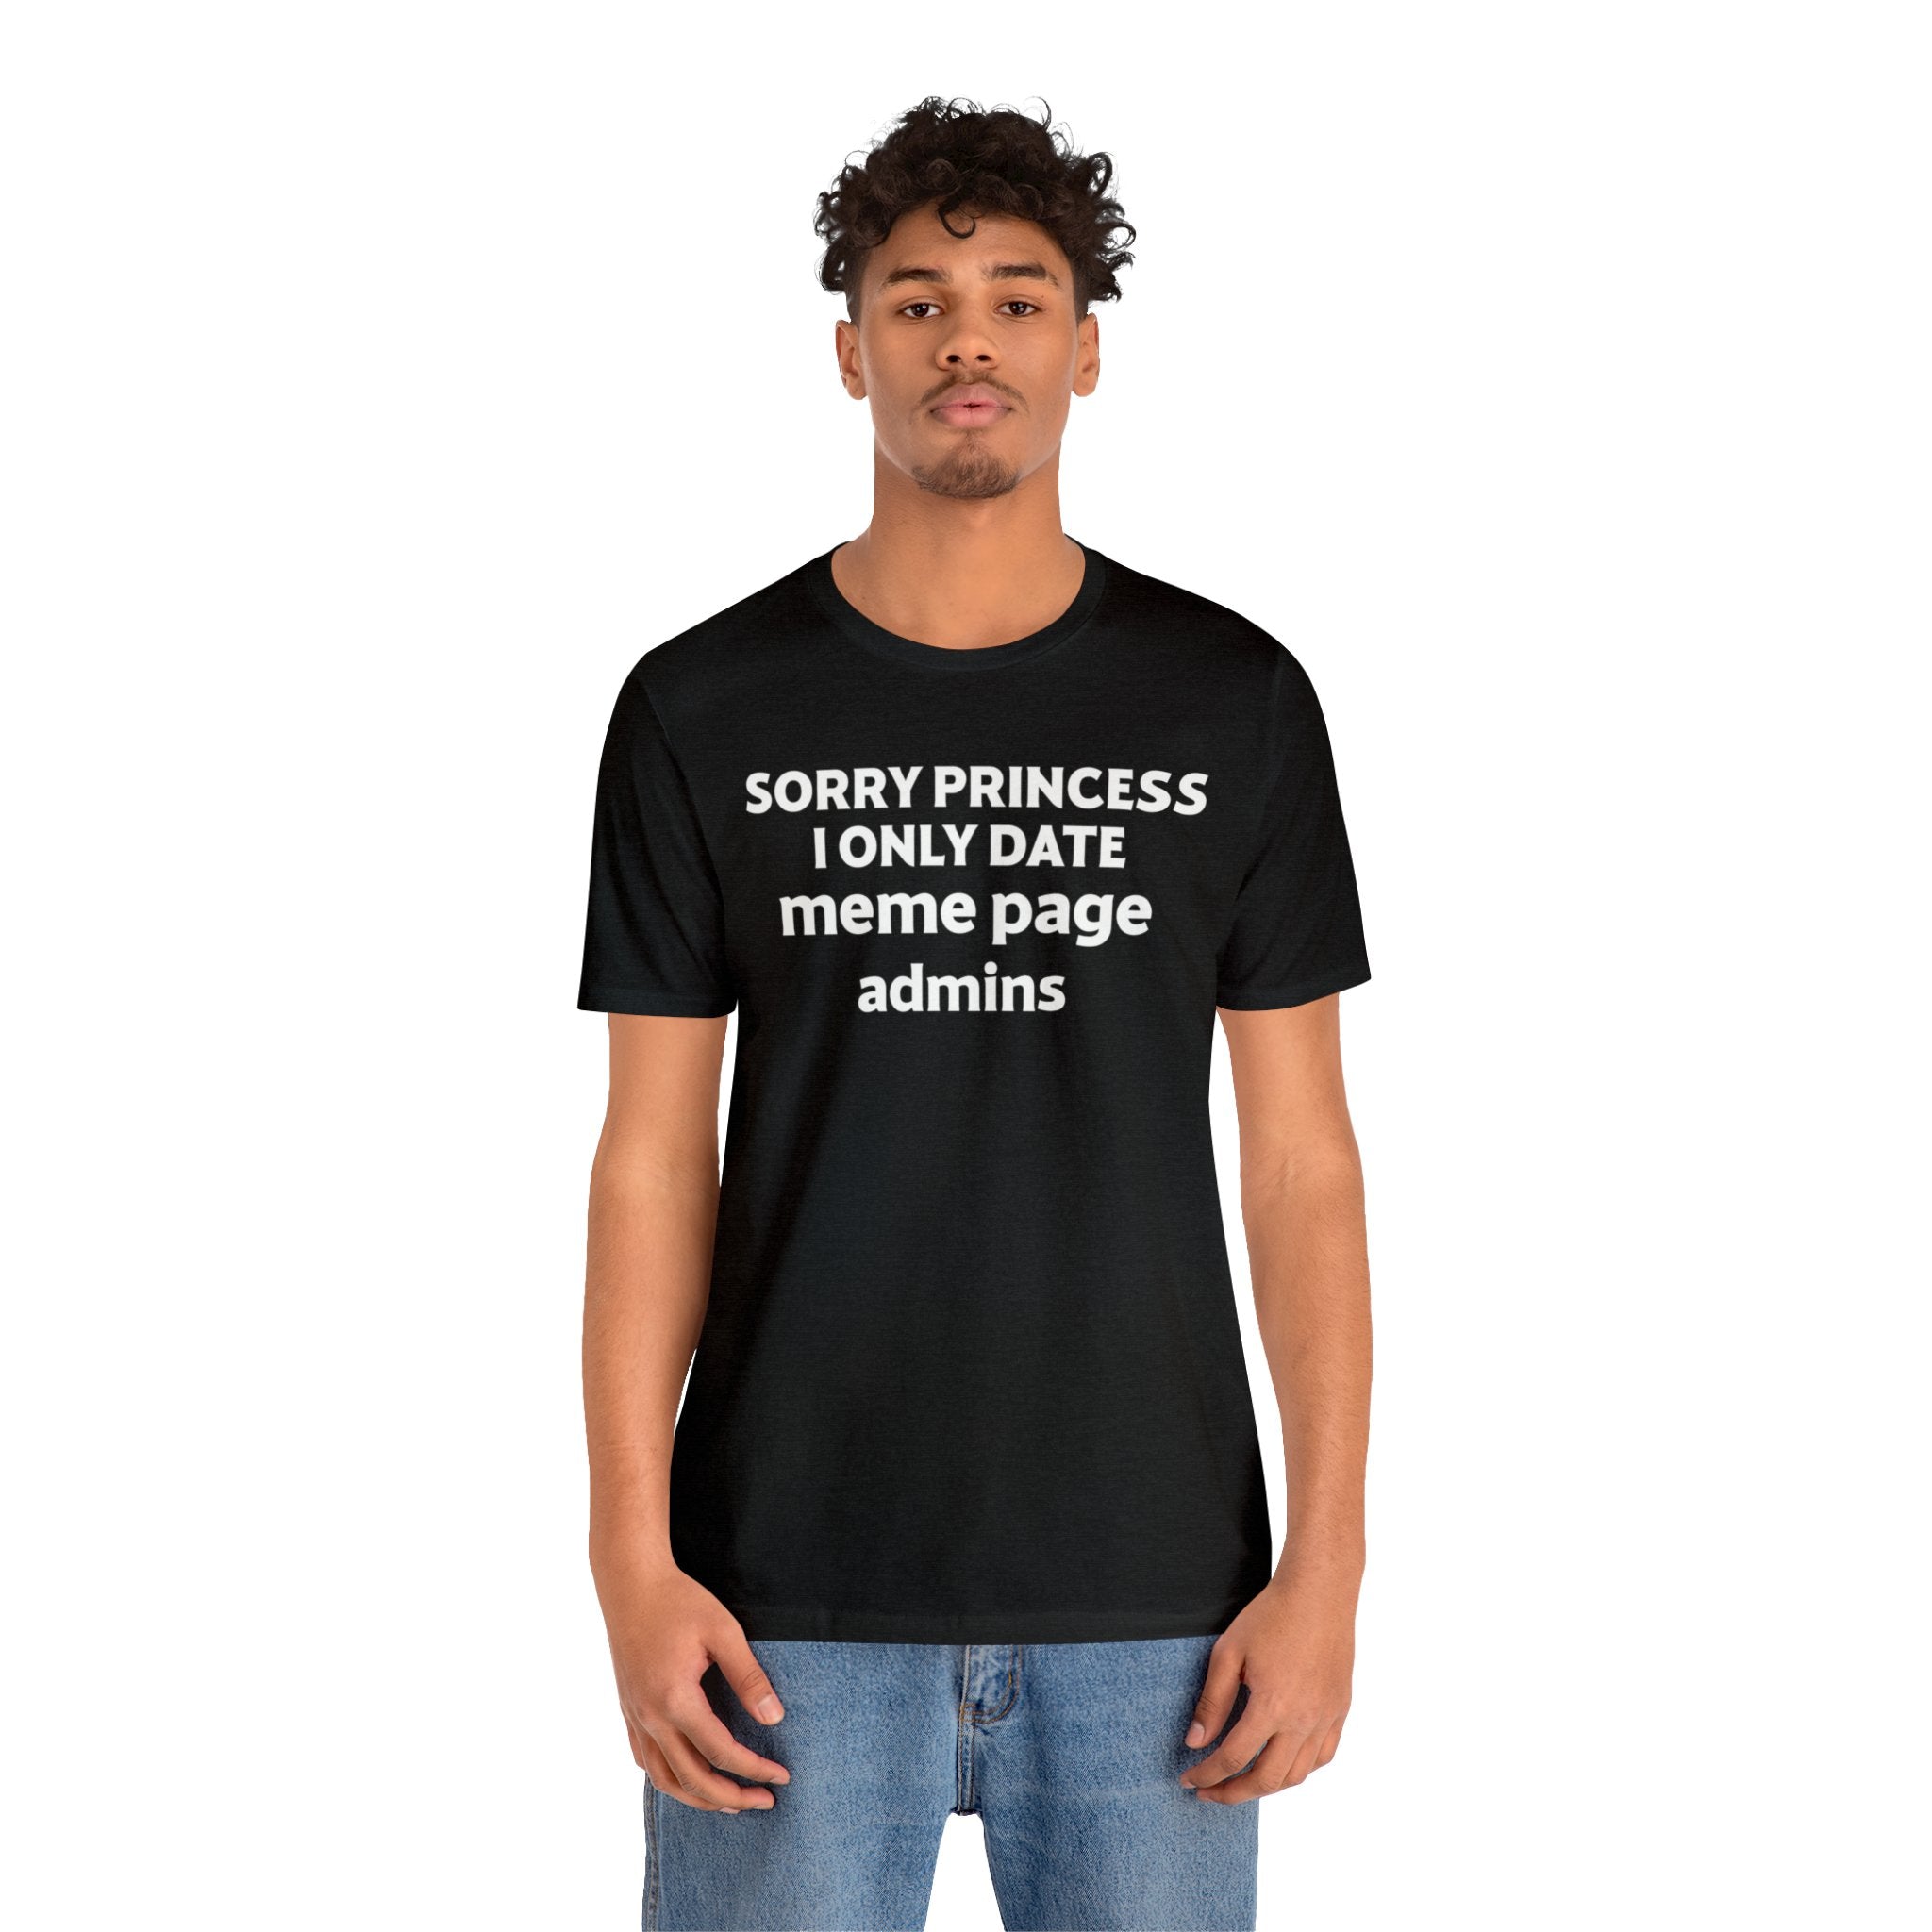 Order your Sorry Princess T-Shirt today.